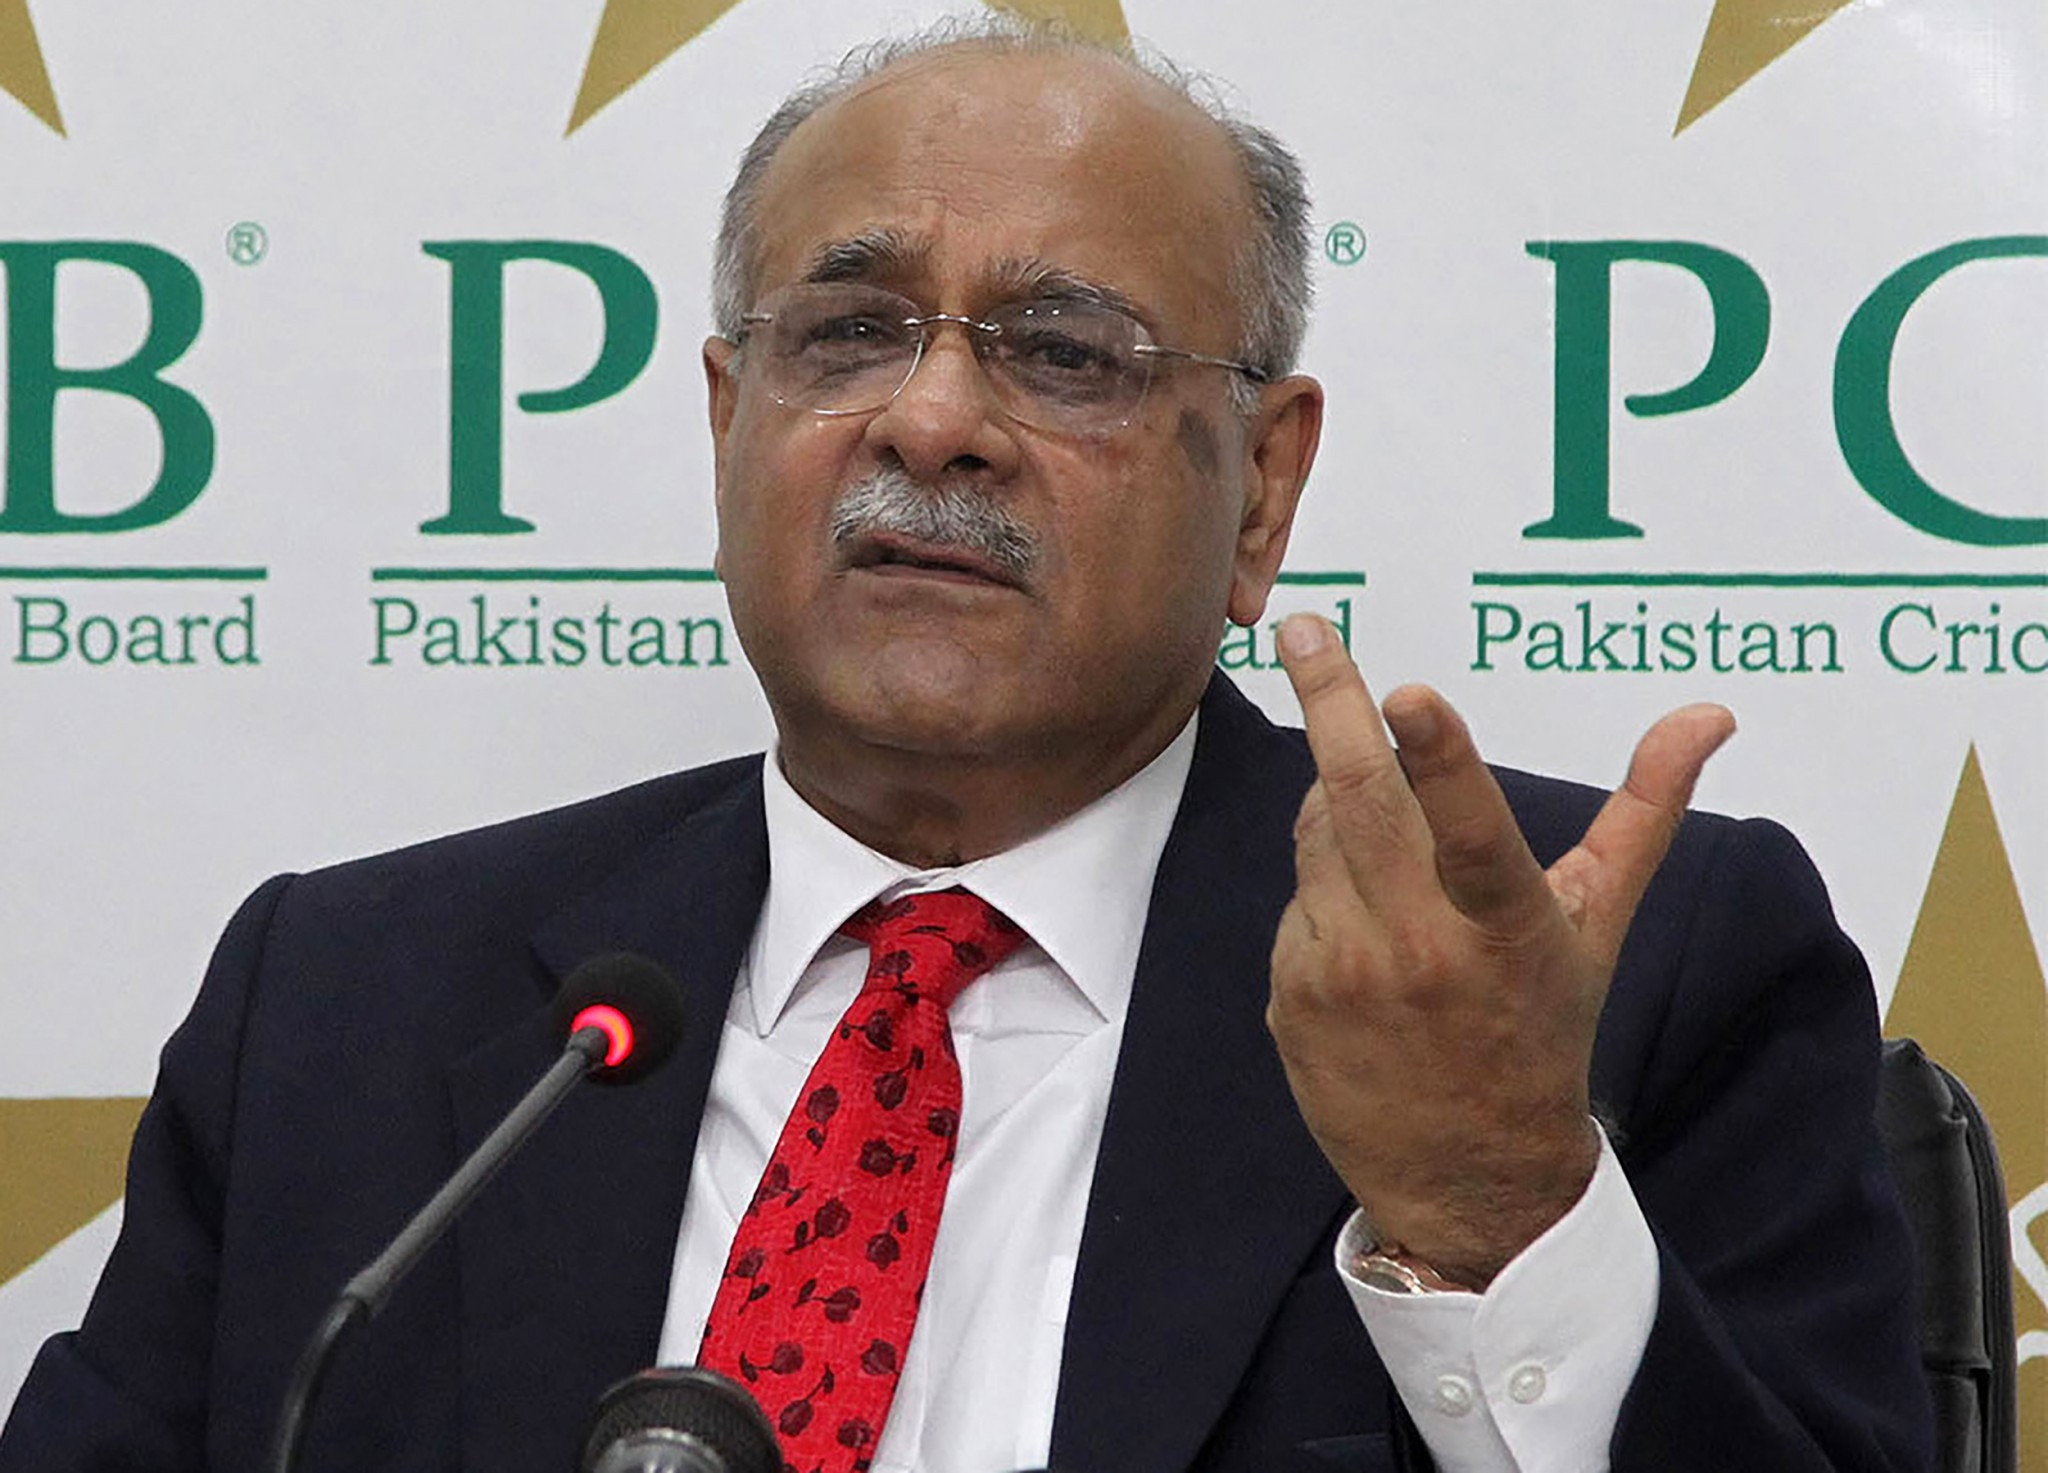 Najam Sethi said he hopes international matches will be played in Pakistan again soon ©Getty Images